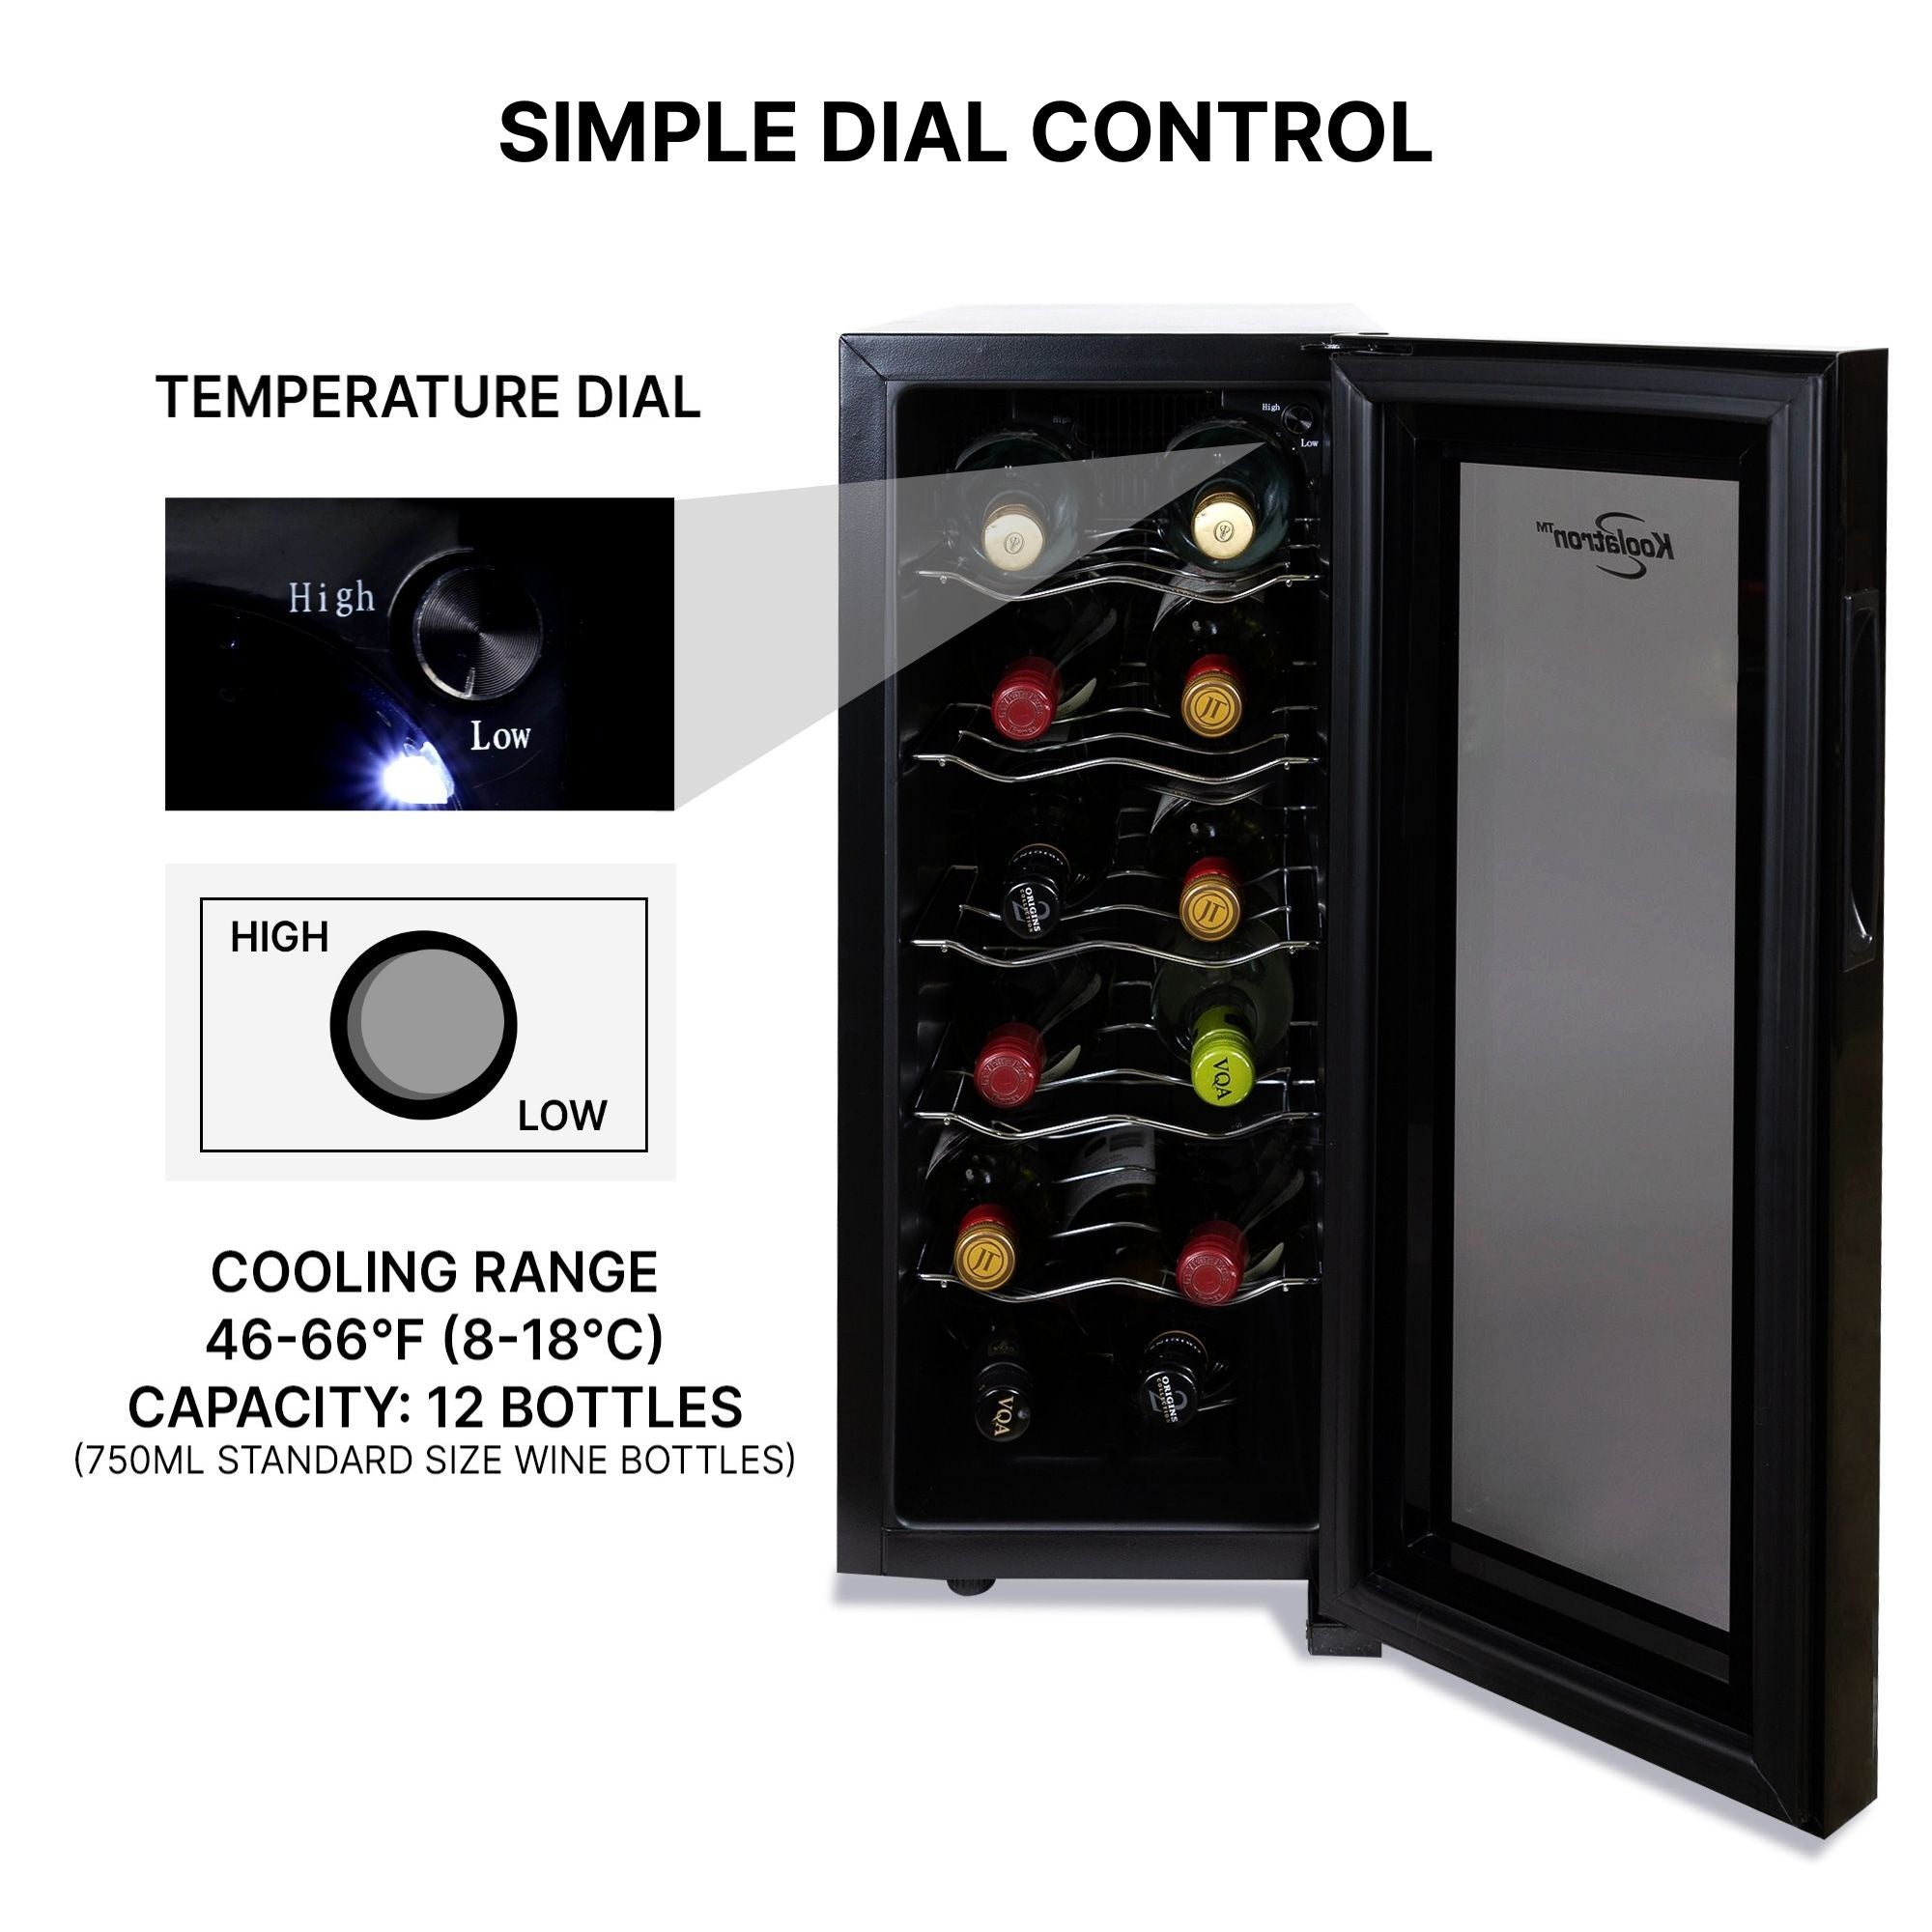 Koolatron 12 bottle wine chiller, open and filled with bottles of wine, on a white background with an inset closeup, labeled, of the temperature control knob to the left. Text above reads "Simple dial control" and text below the inset image lists temperature range and capacity